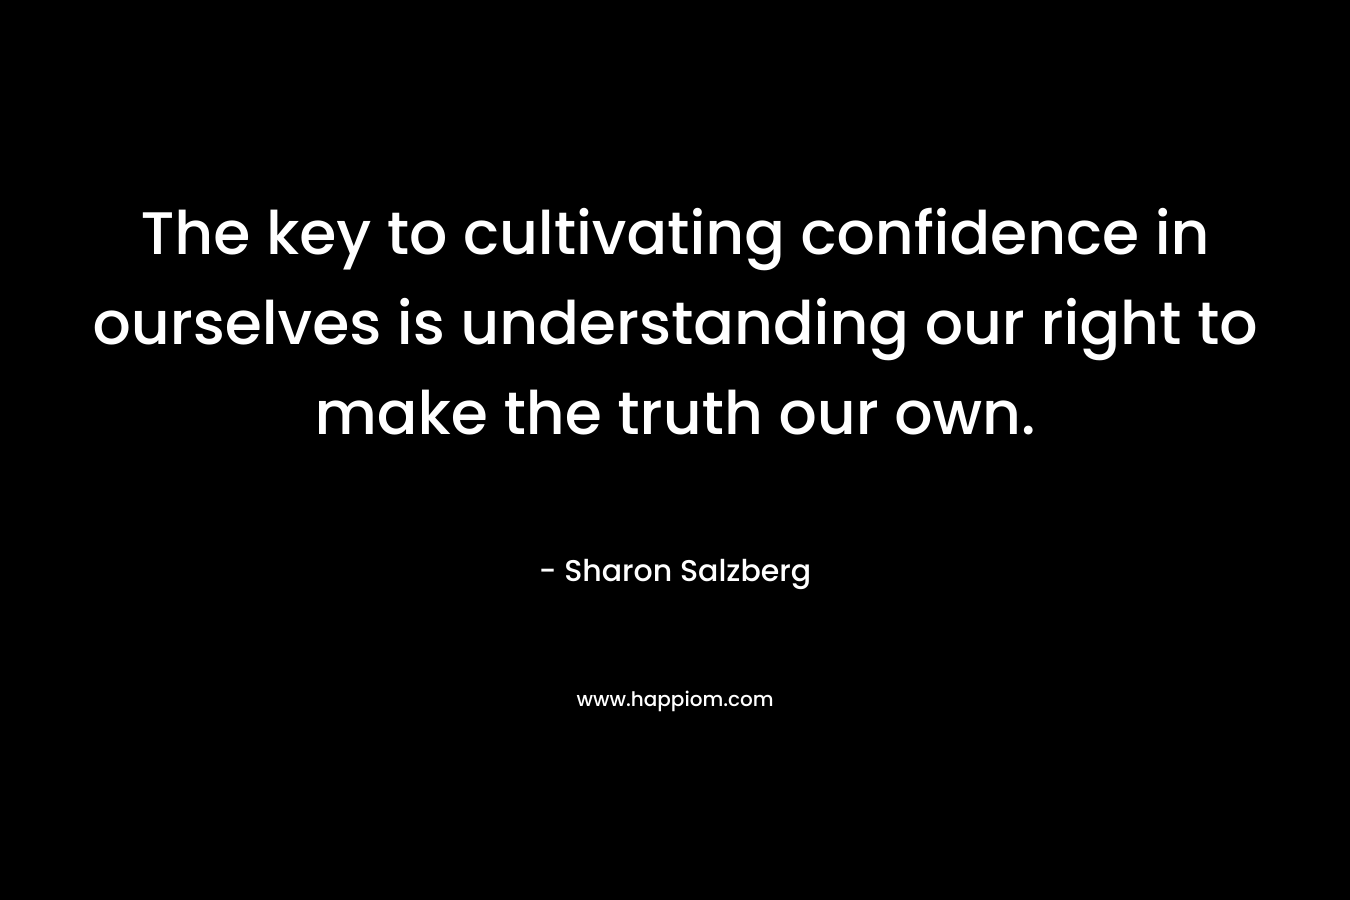 The key to cultivating confidence in ourselves is understanding our right to make the truth our own.